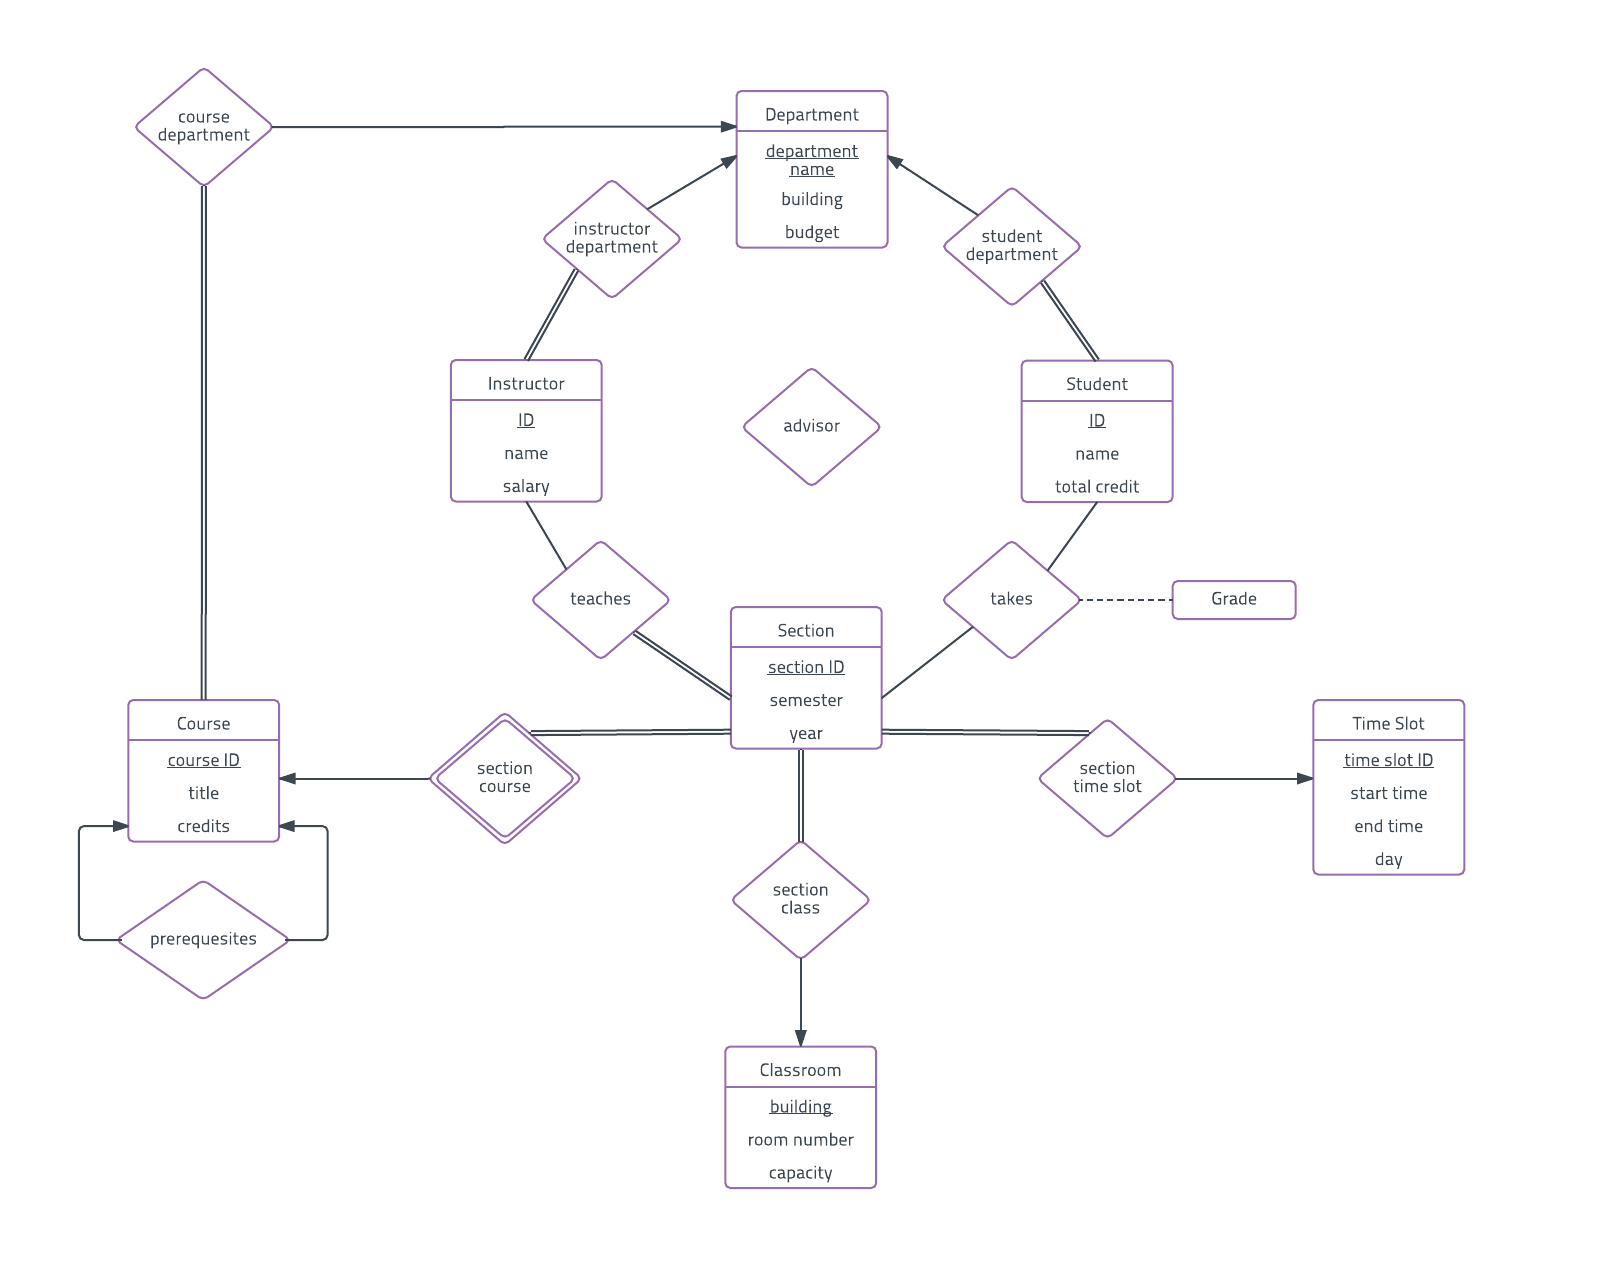 Er Diagram Examples And Templates | Lucidchart throughout Er Diagram Practice Examples